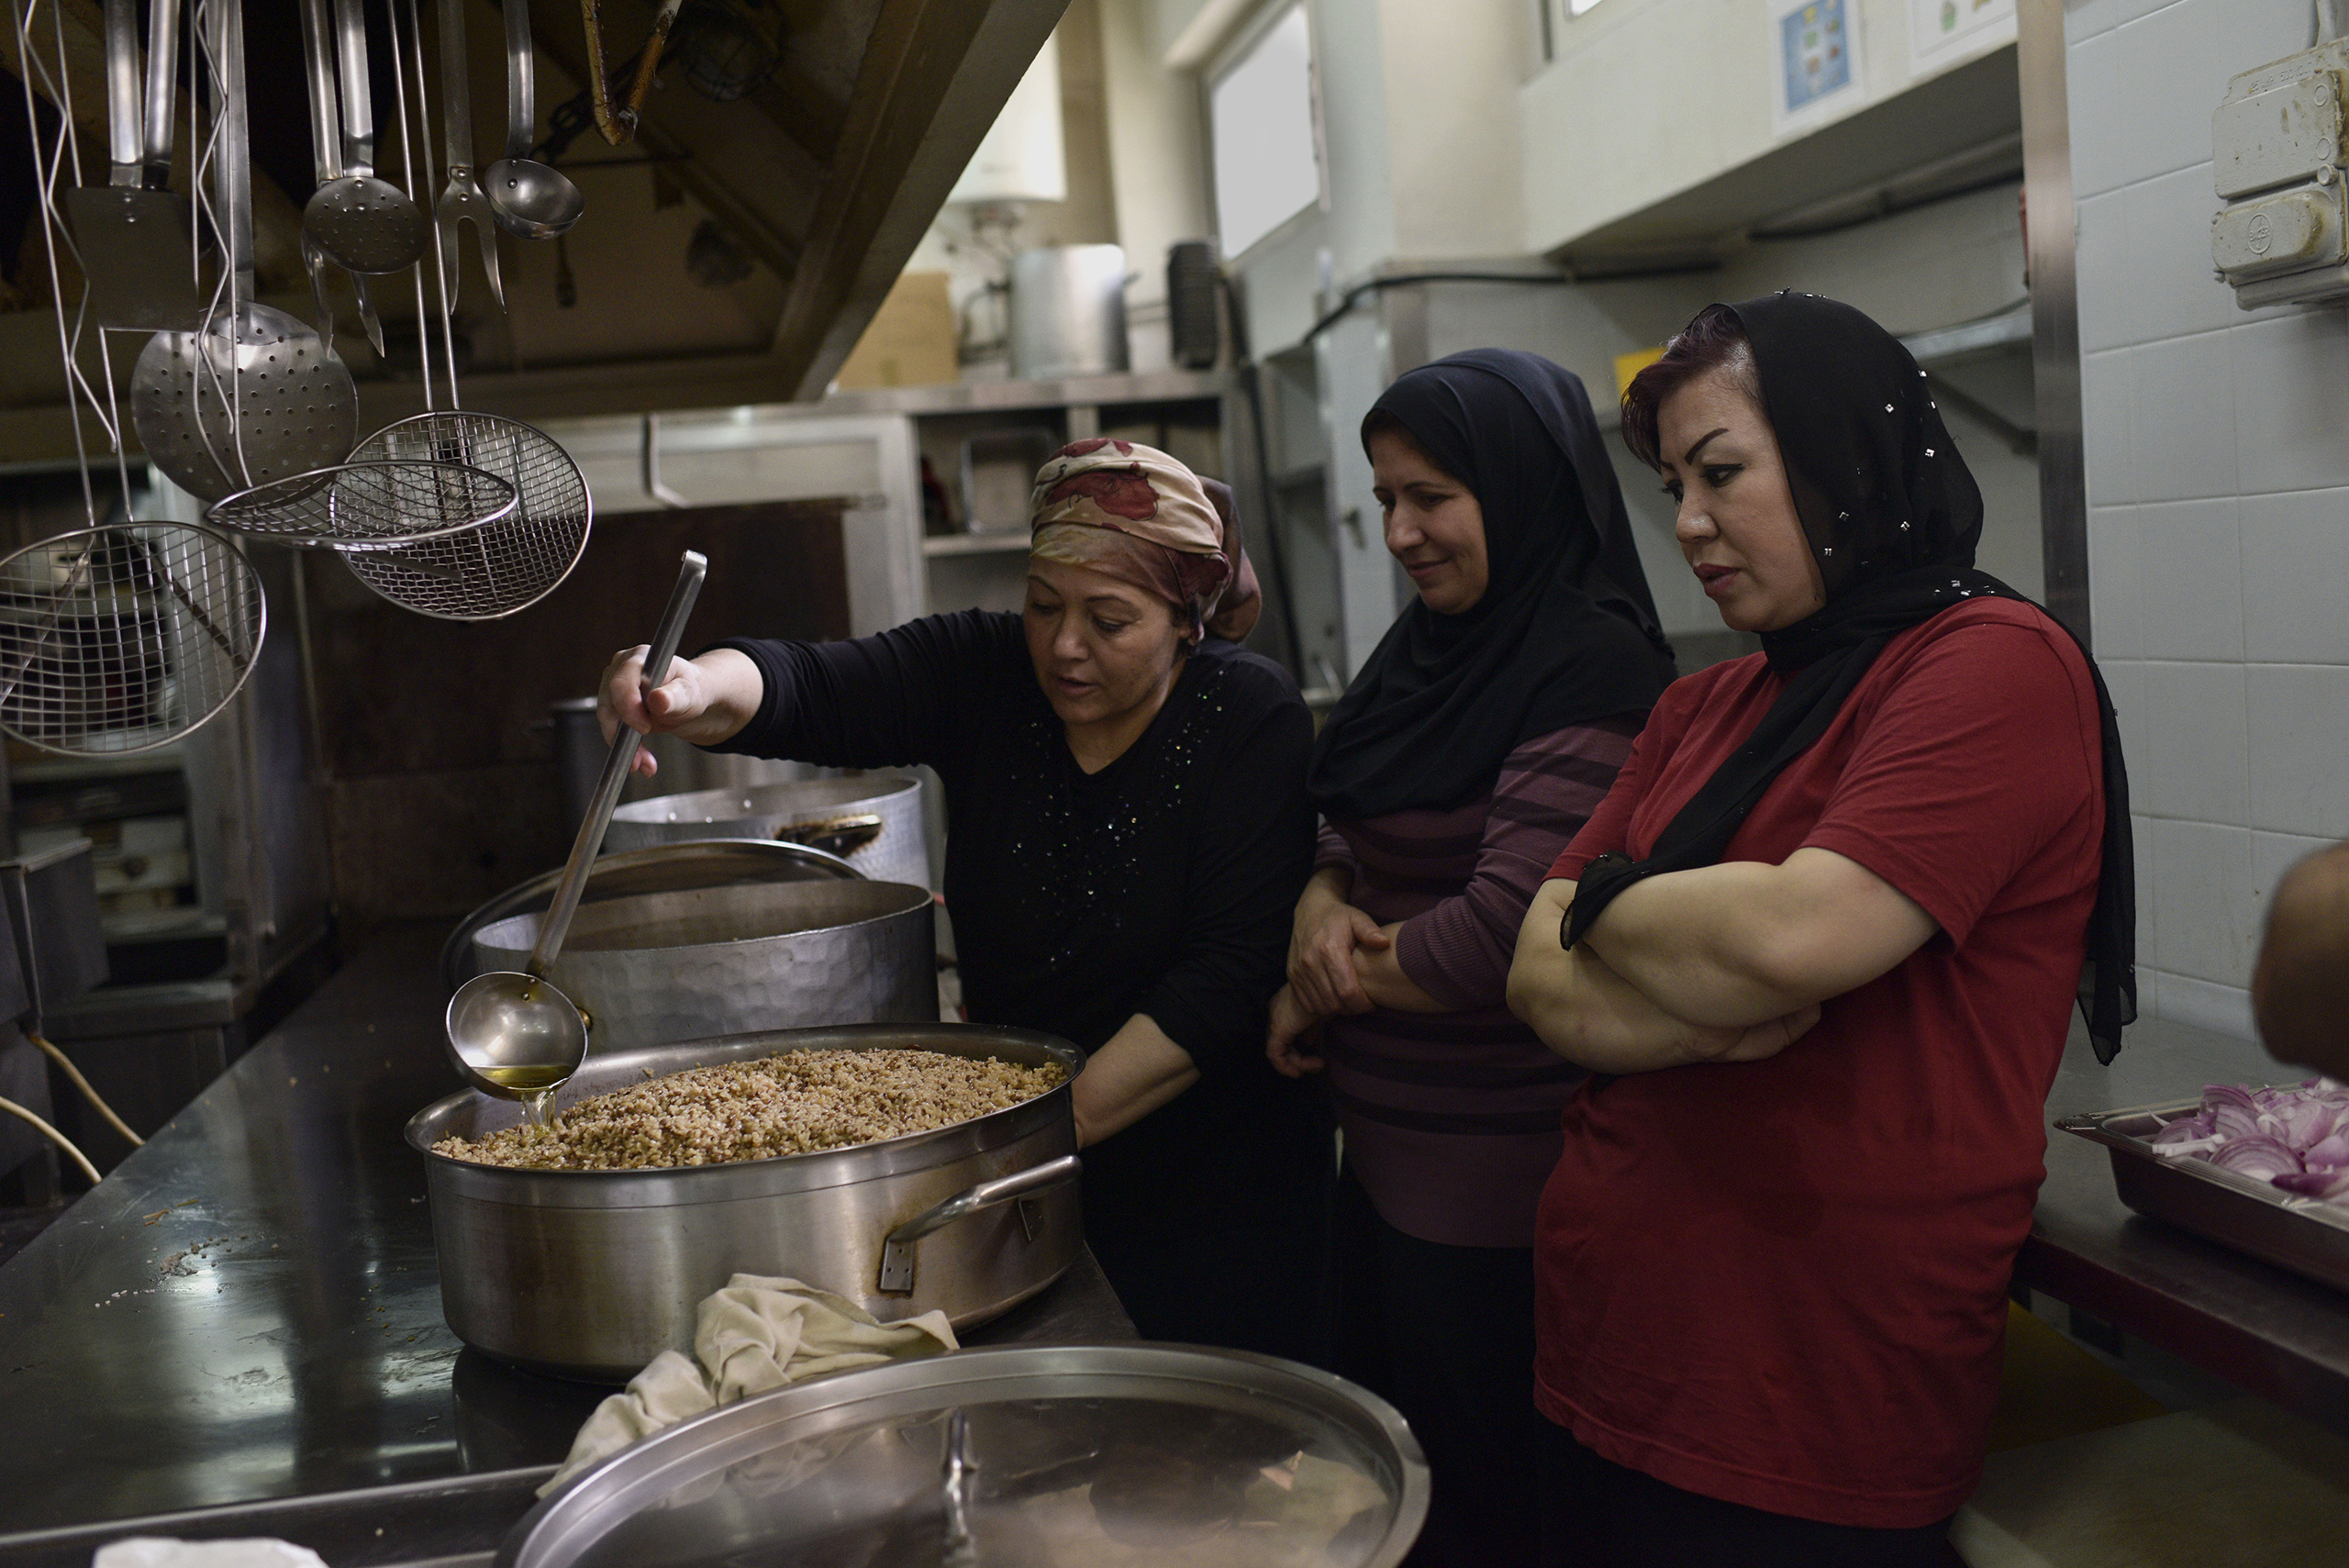 Women who made it out of some of the world's worst conflicts, like Syria and Afghanistan, cook alongside one another in the industrial kitchen of the City Plaza hotel. (Lynsey Addario—Getty Images Reportage for TIME)